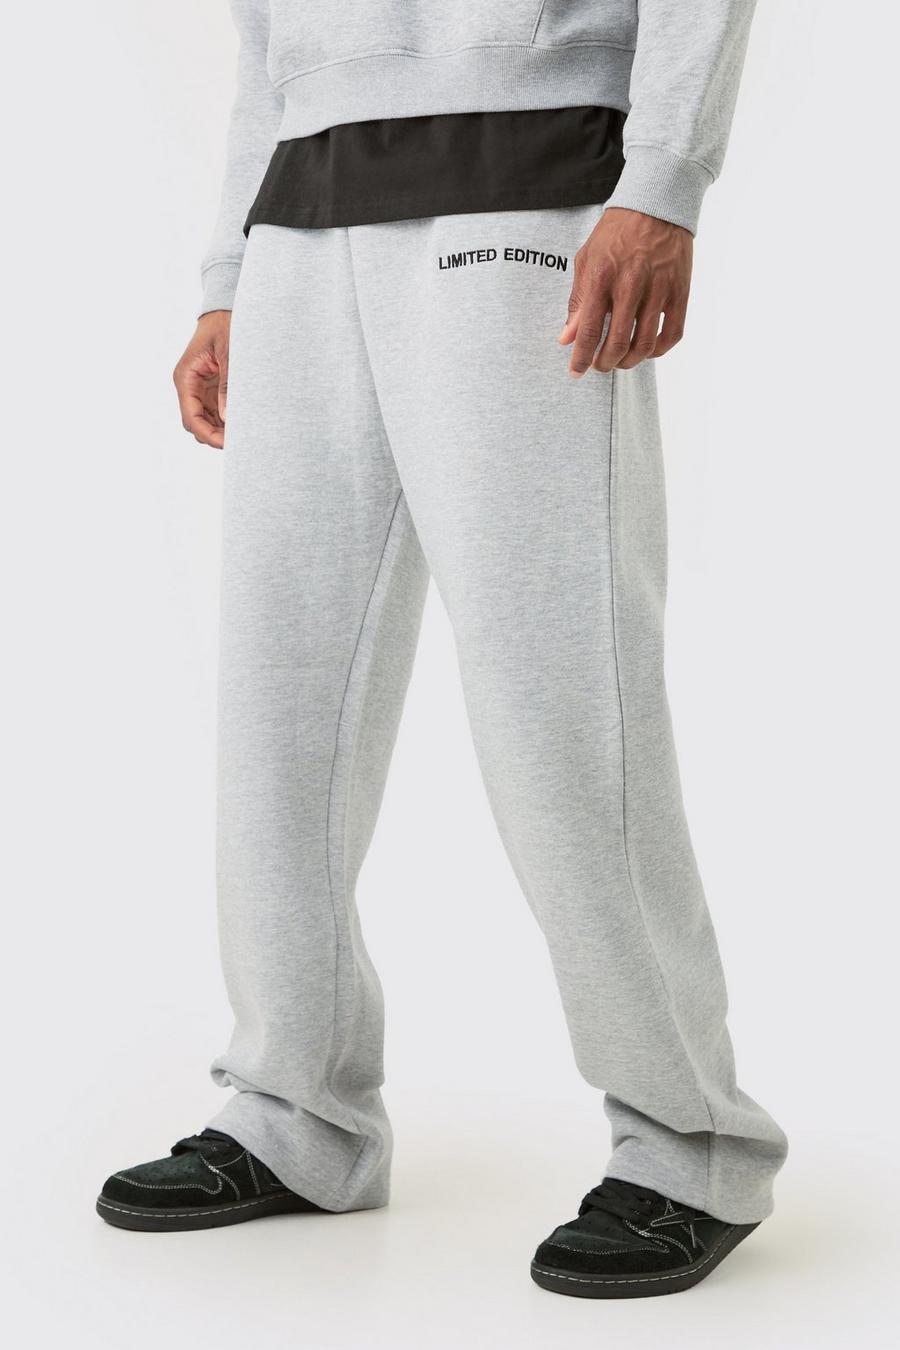 Grey marl Tall Relaxed Fit Limited Jogger